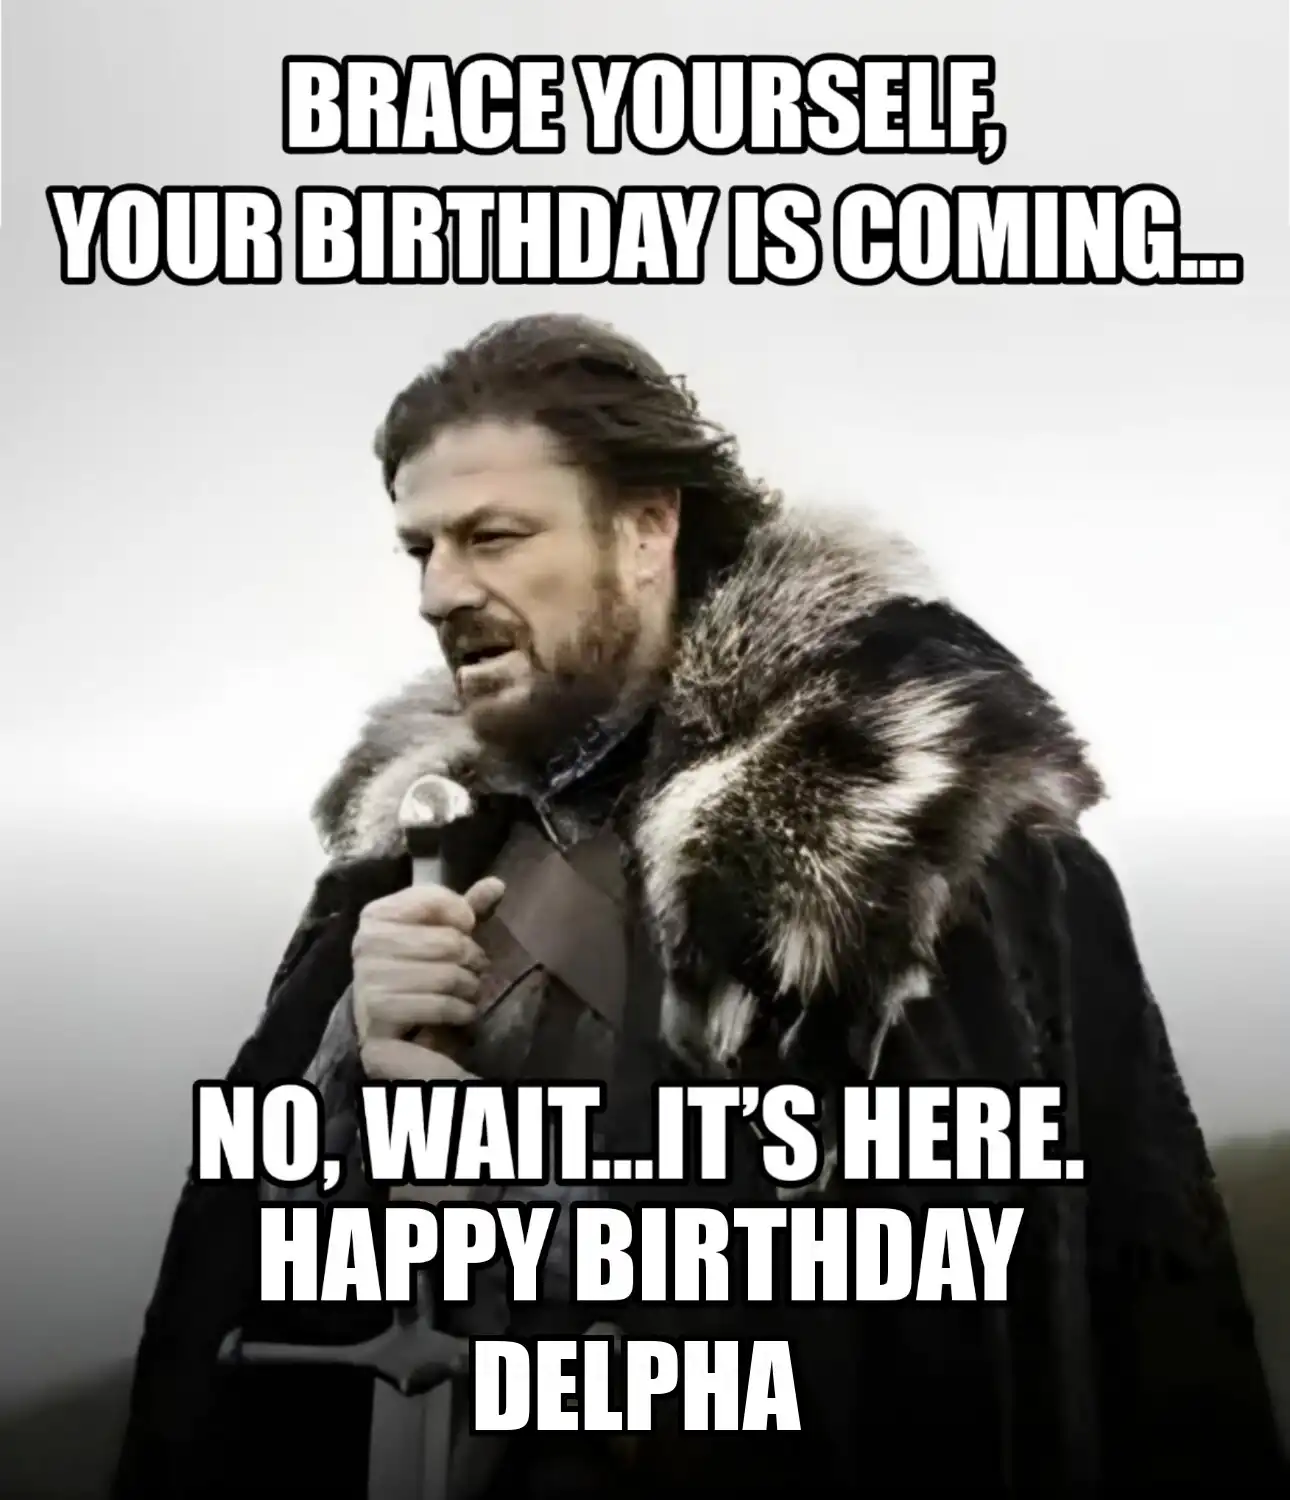 Happy Birthday Delpha Brace Yourself Your Birthday Is Coming Meme